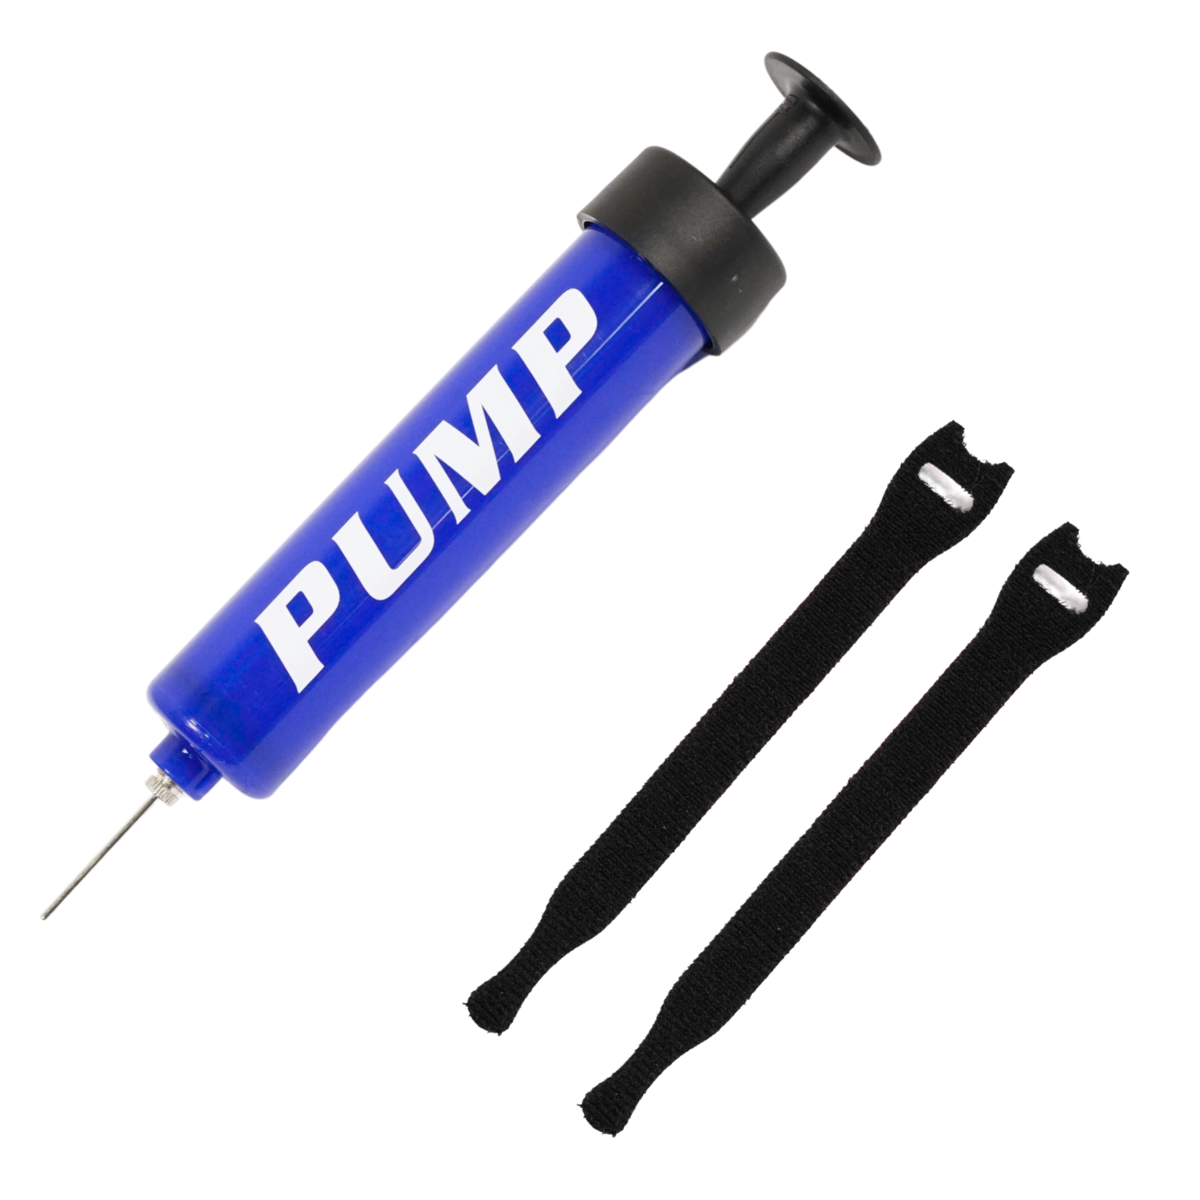 Propel Pump And Hook And Loop Straps